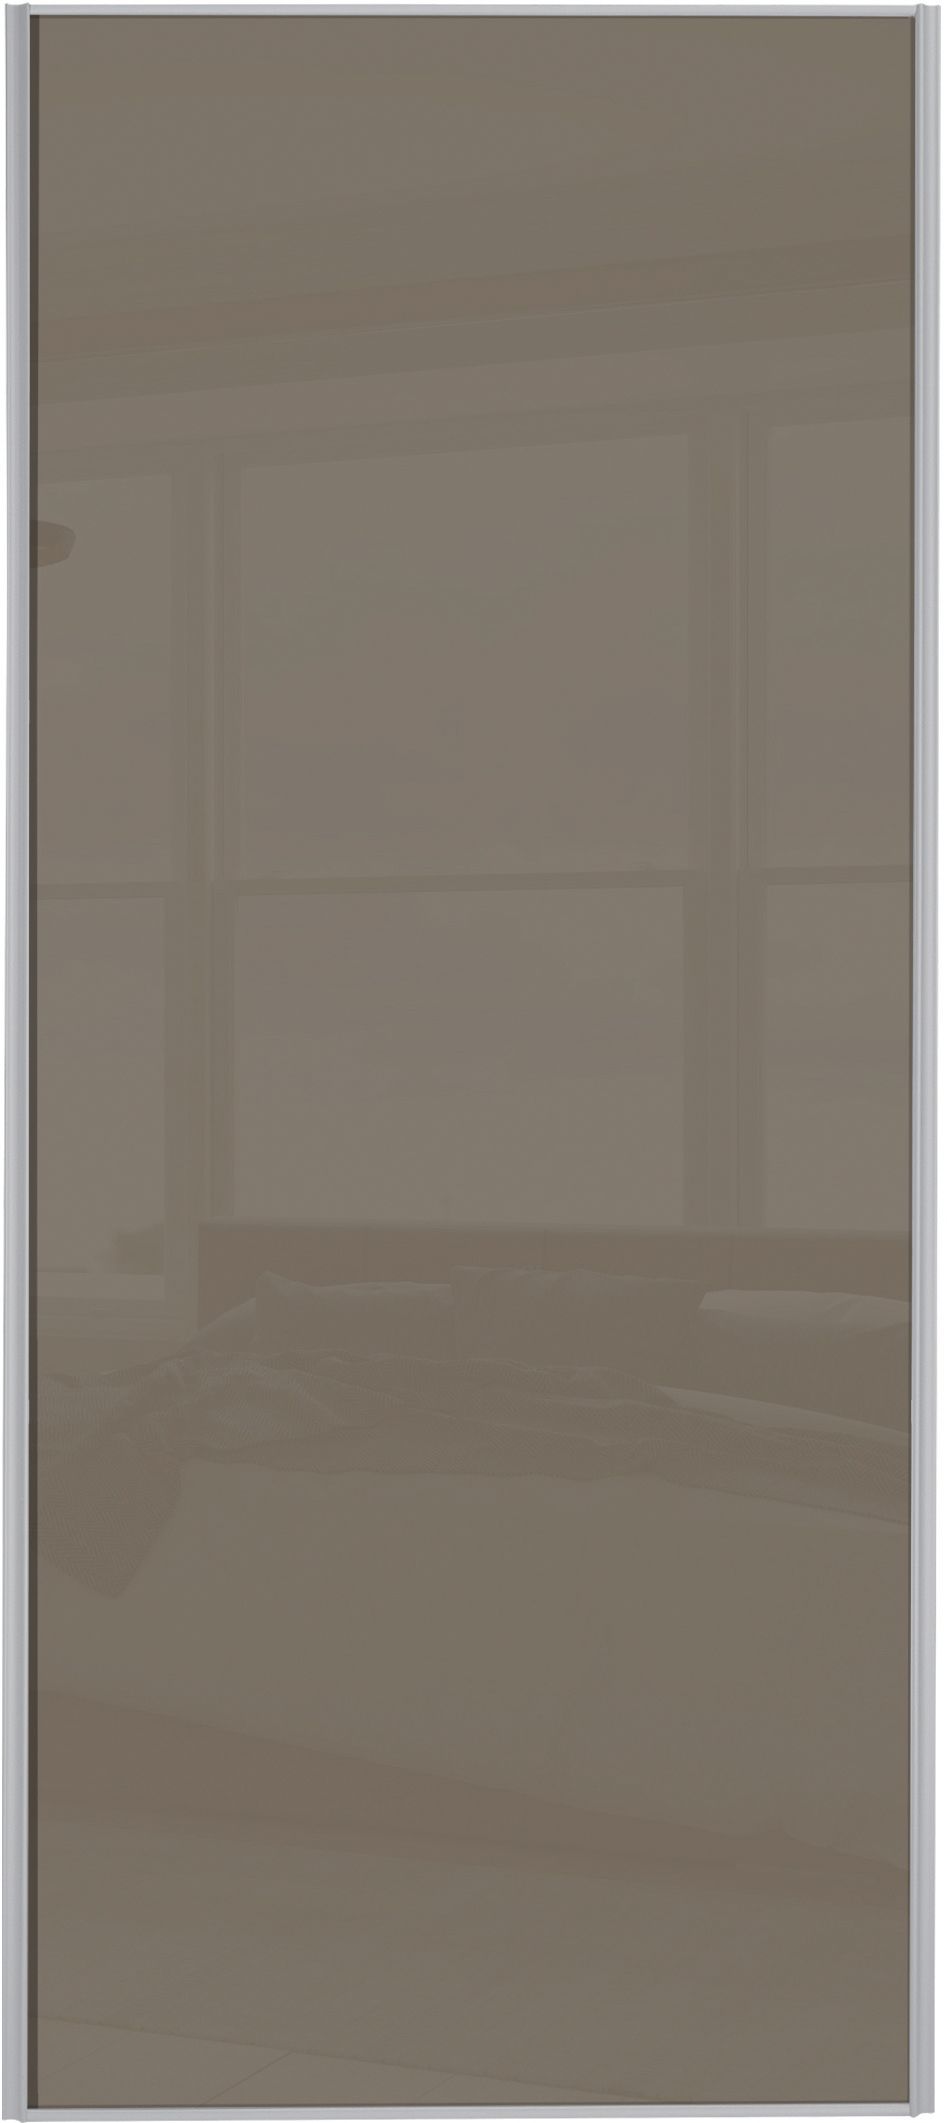 Image of Spacepro Sliding Wardrobe Door Silver Framed Single Panel Cappuccino Glass - 2220 x 610mm